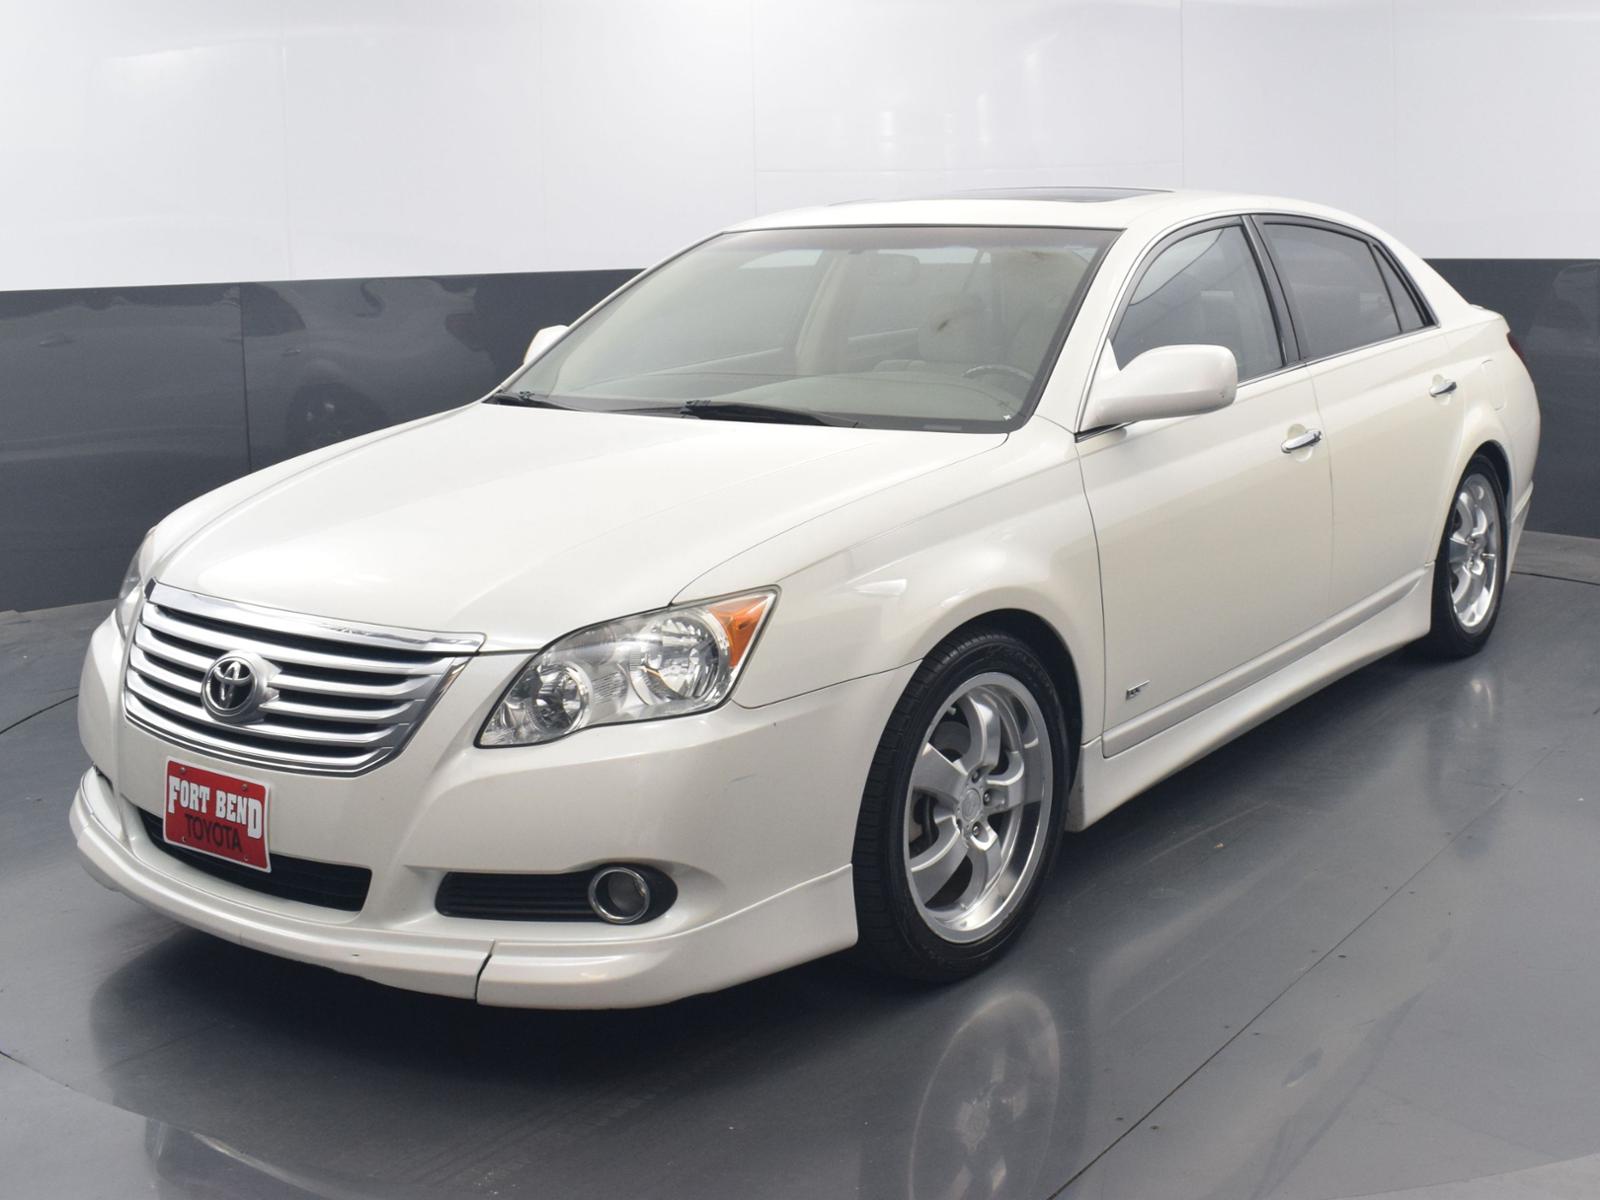 Pre-Owned 2009 Toyota Avalon 4dr Sdn Limited 4dr Car in Houston #9U326268 |  Sterling McCall Toyota